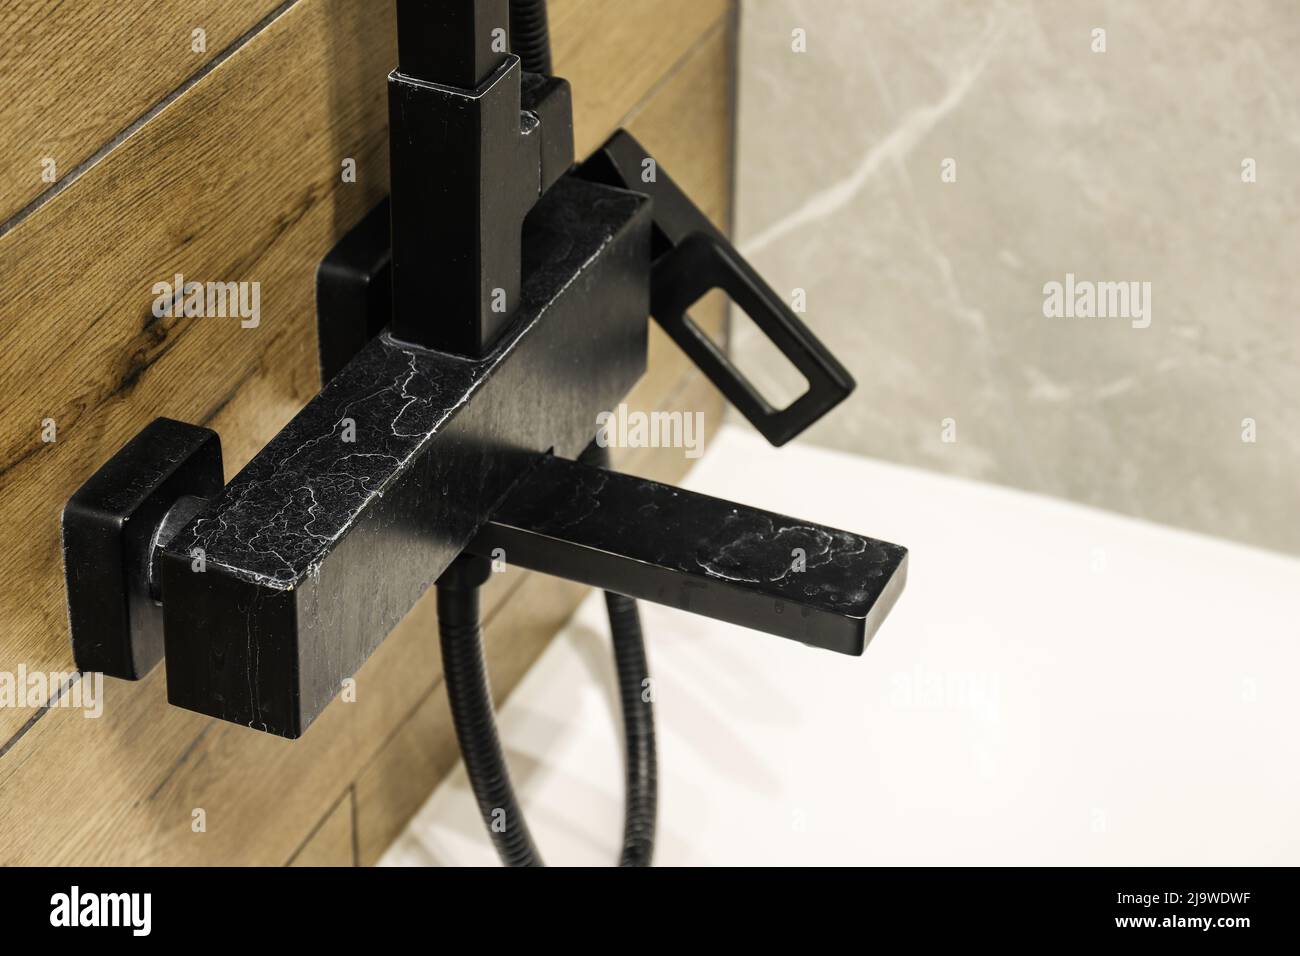 Black faucet with limescale deposits due to water hardness close-up Stock Photo